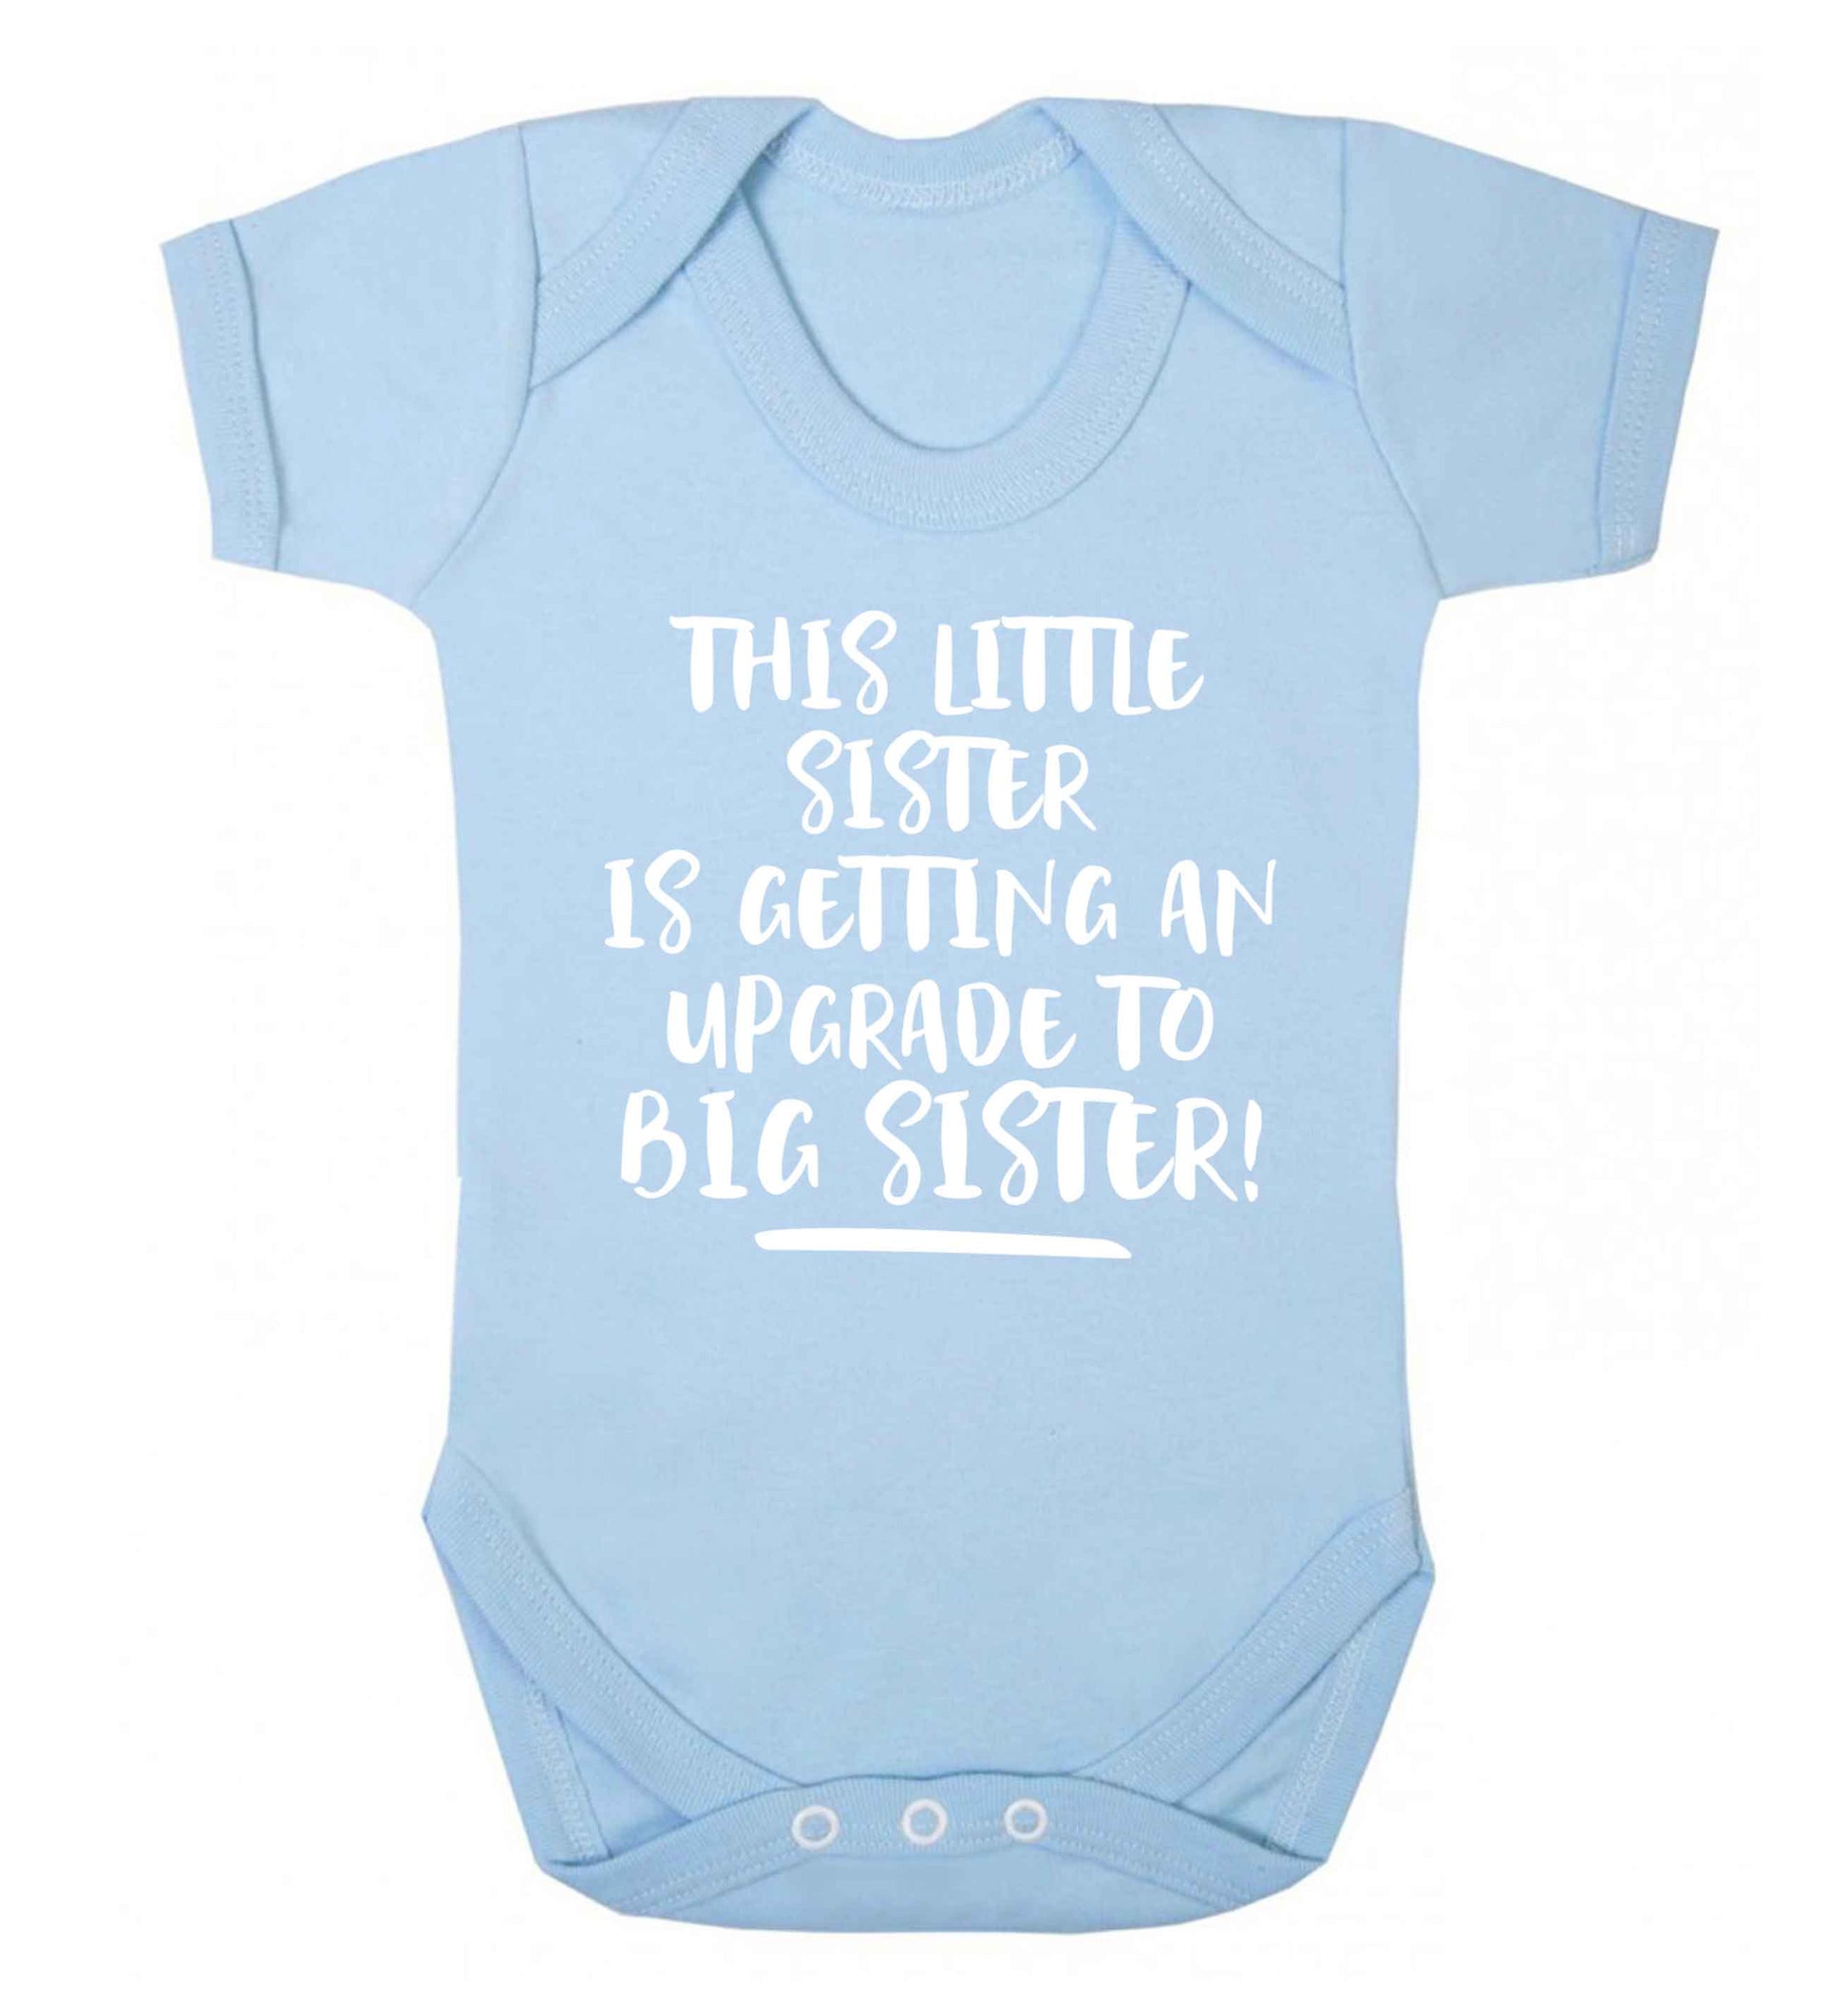 This little sister is getting an upgrade to big sister! Baby Vest pale blue 18-24 months